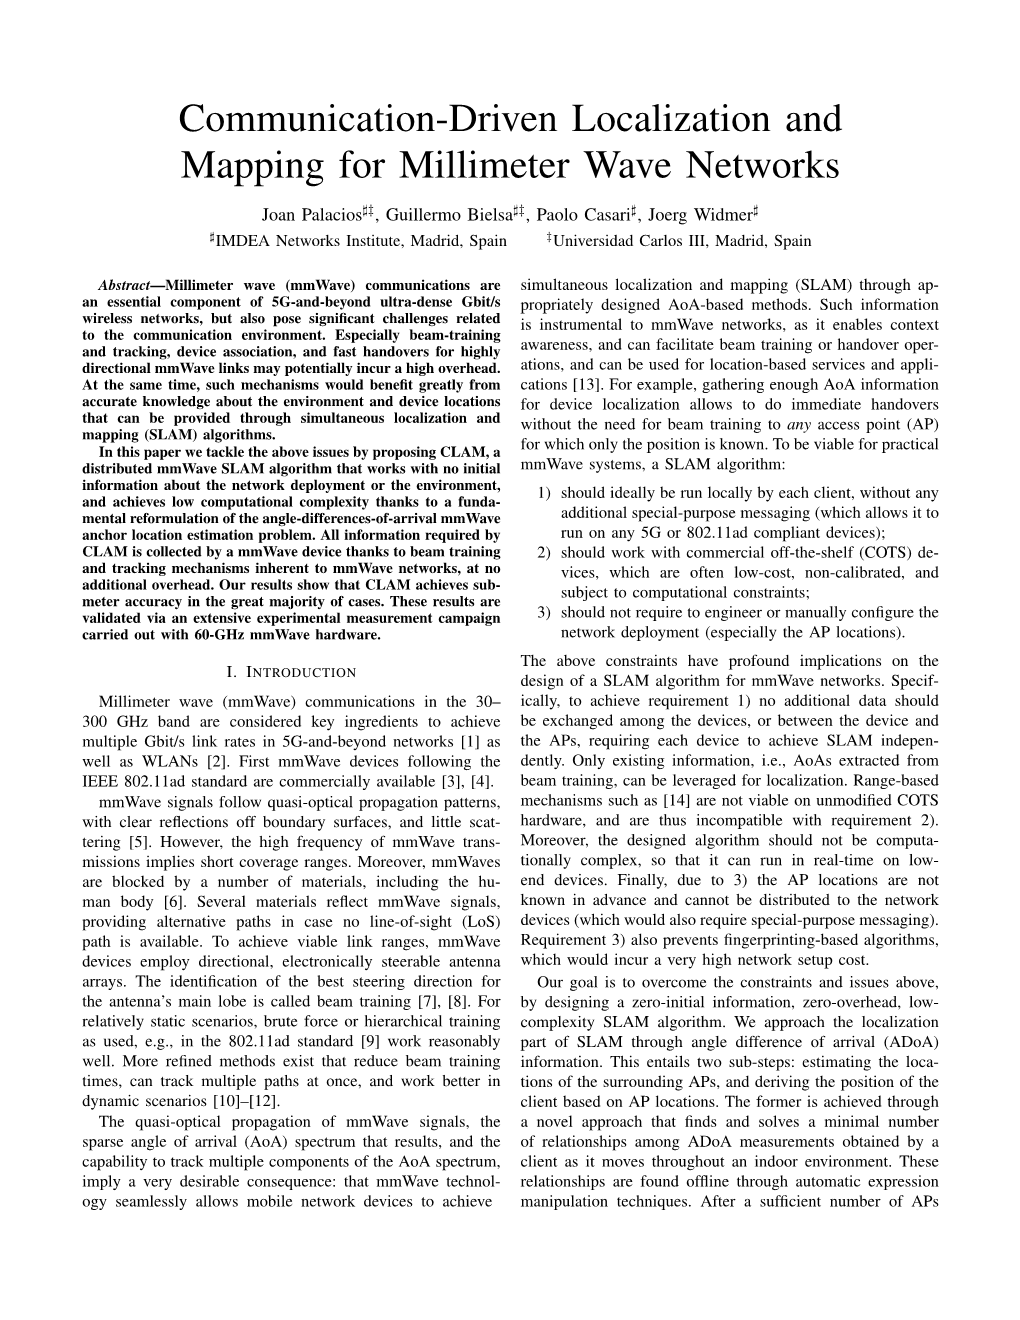 Communication-Driven Localization and Mapping for Millimeter Wave Networks